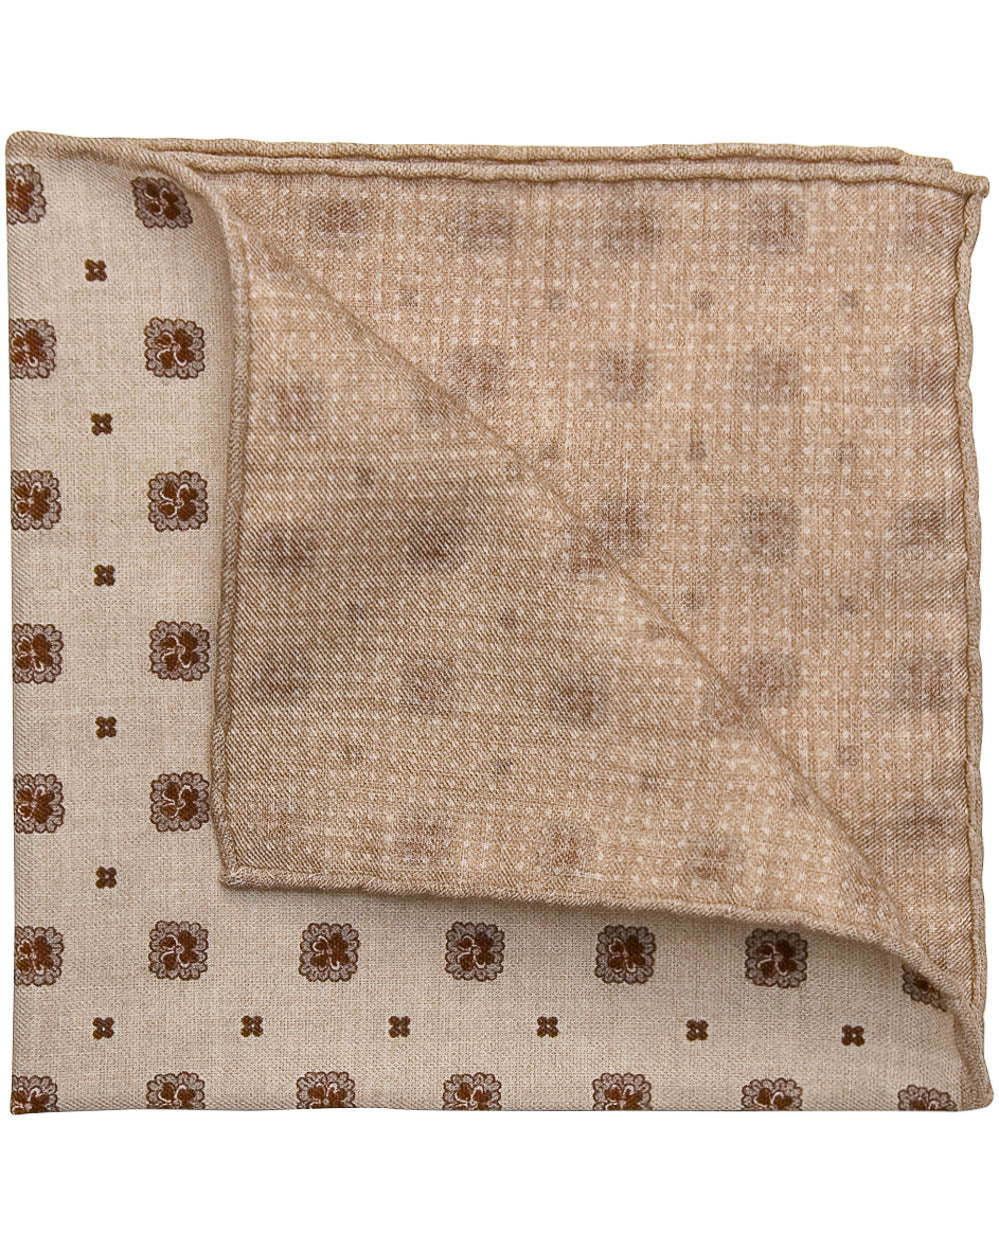 Tan with Grey and Rust Medallion Pocket Square